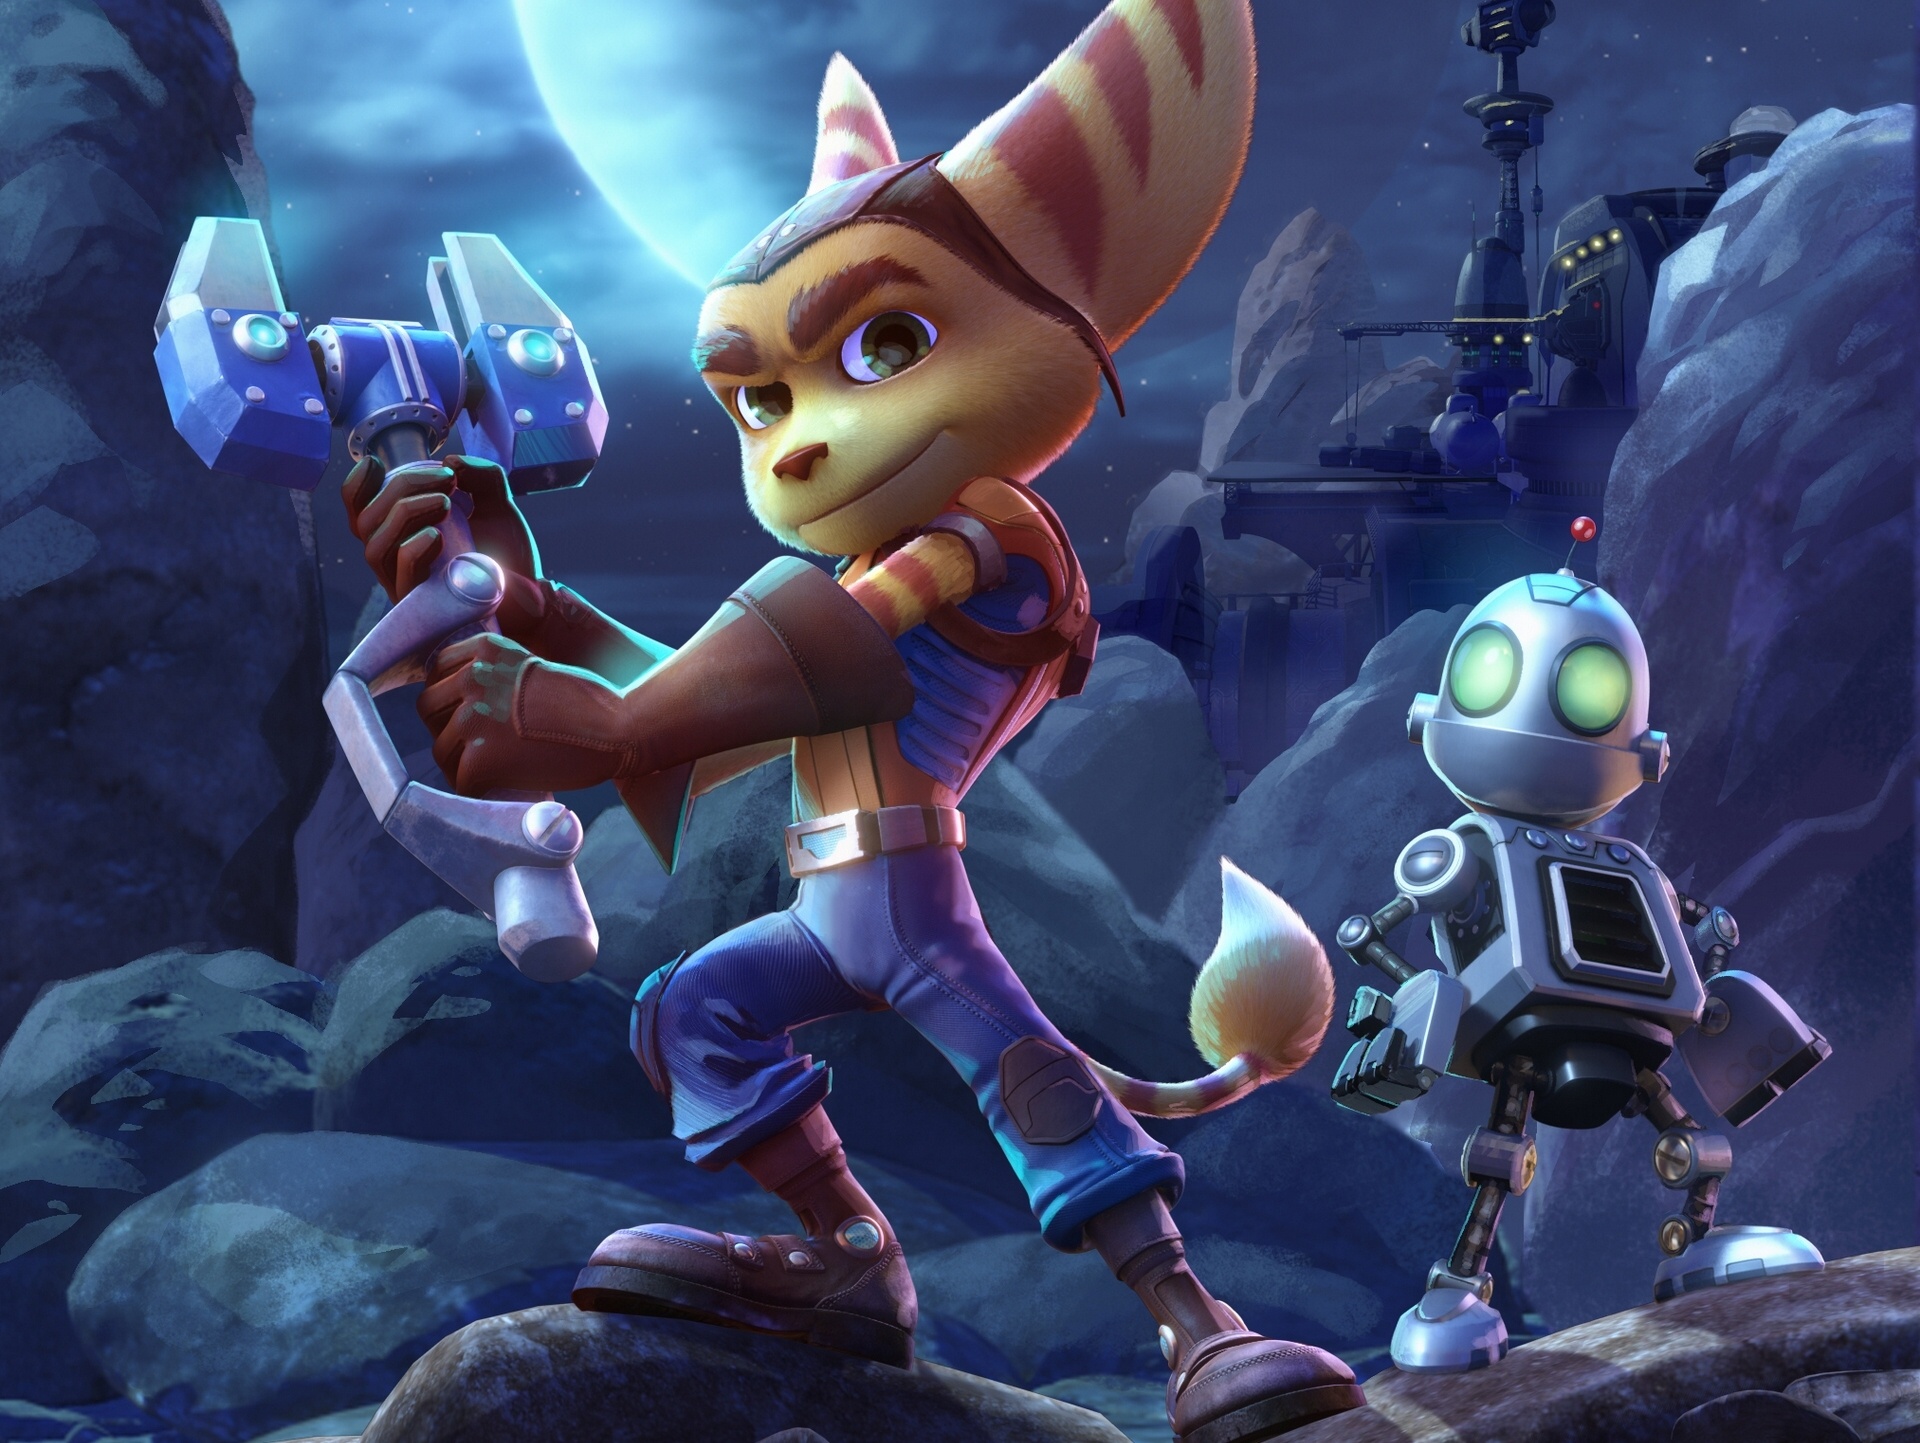 ratchet and clank 2013 download